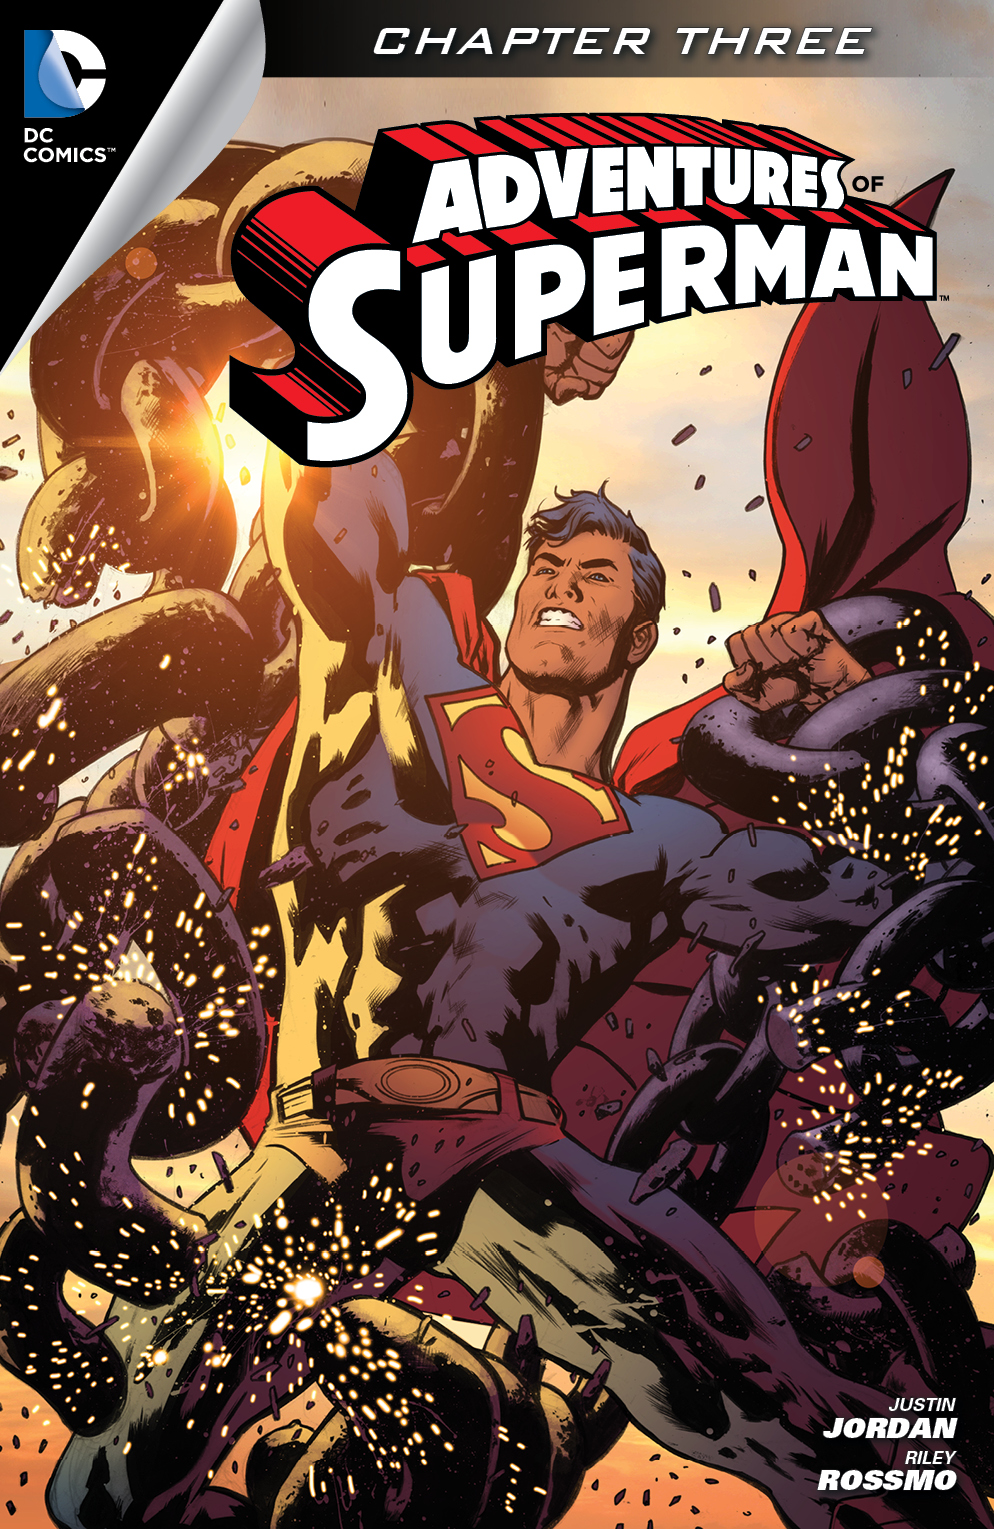 Adventures of Superman (2013-) #3 preview images